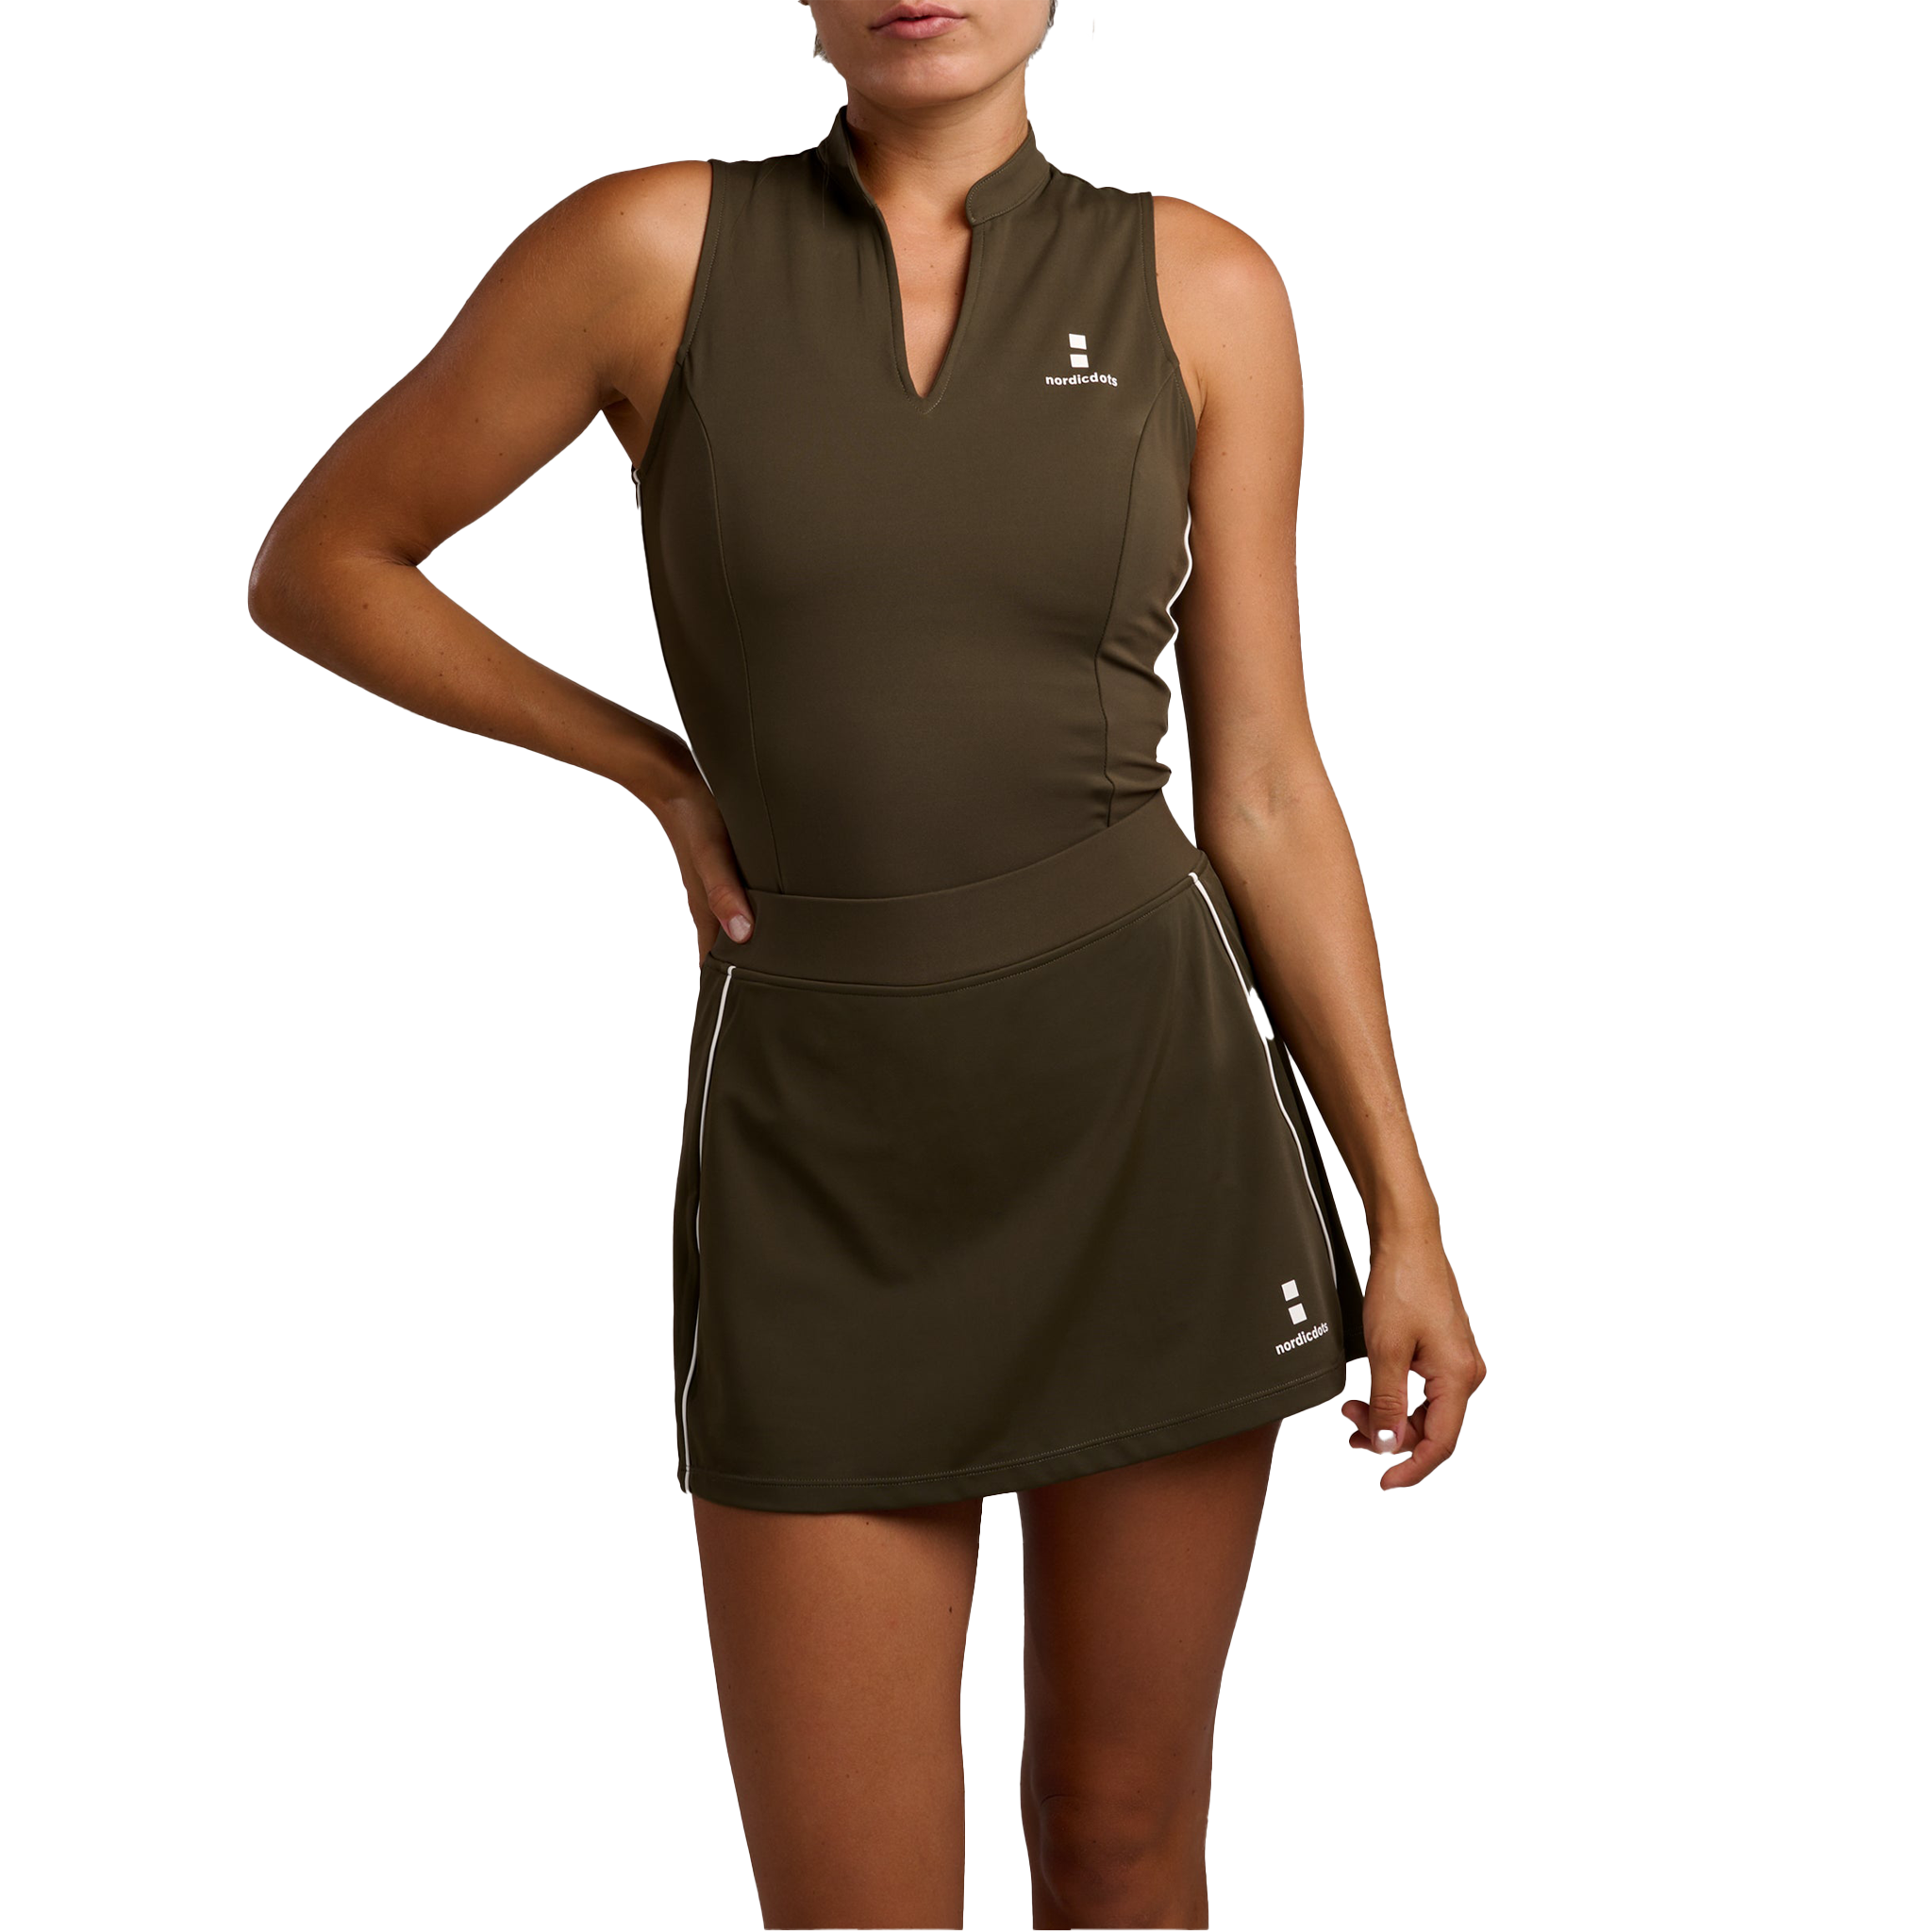 nordicdots Performance Skirt Olive